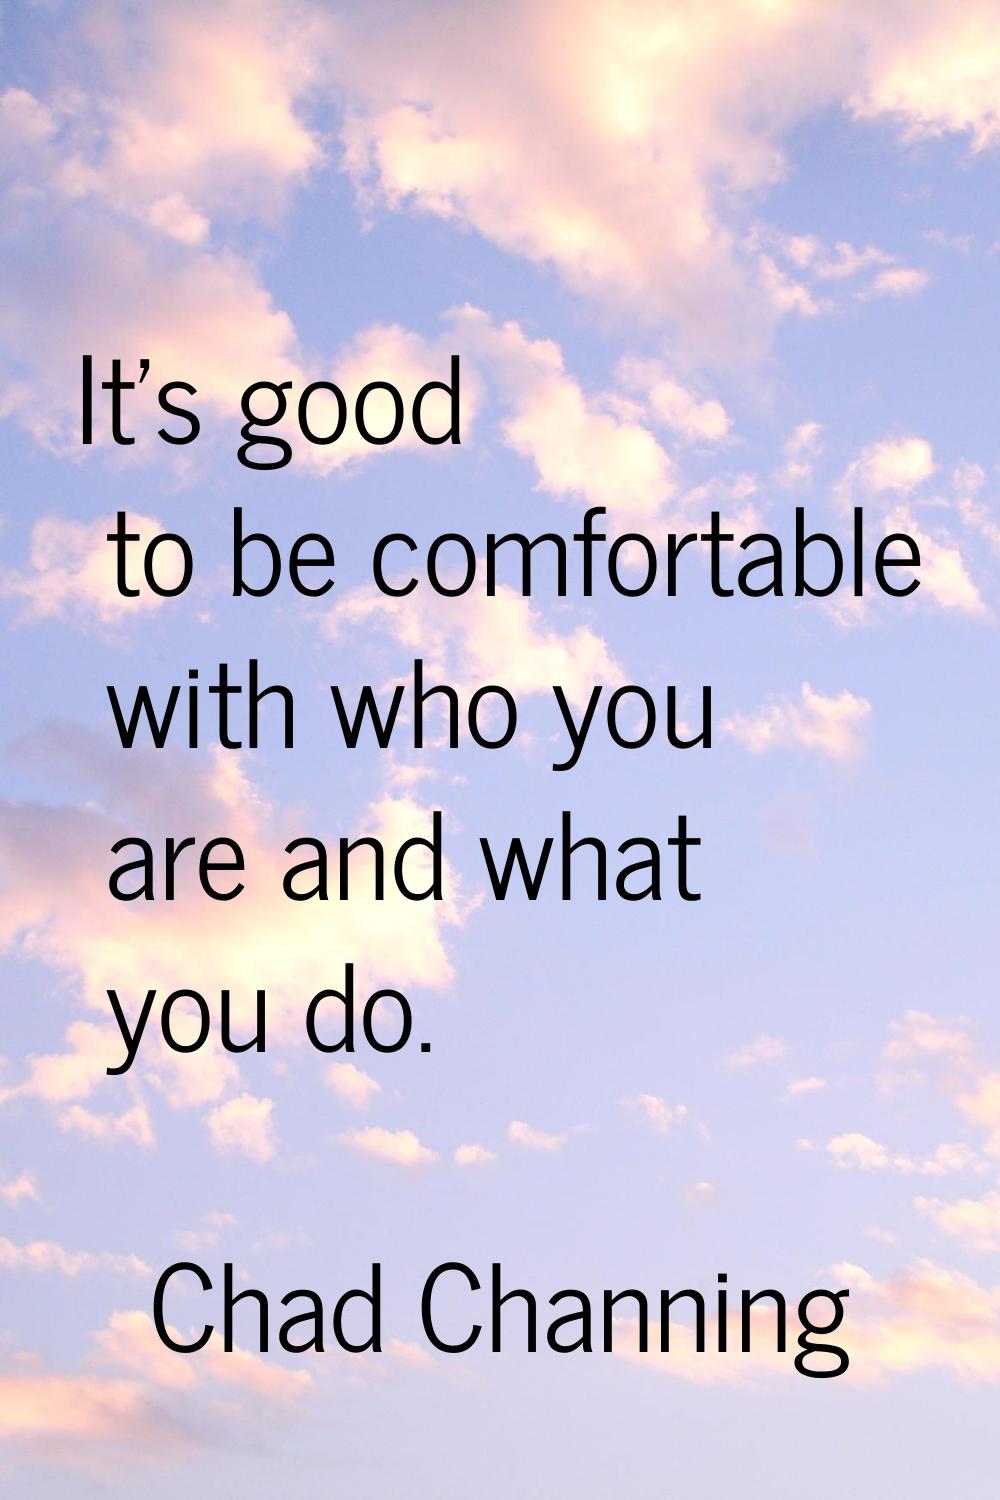 It's good to be comfortable with who you are and what you do.